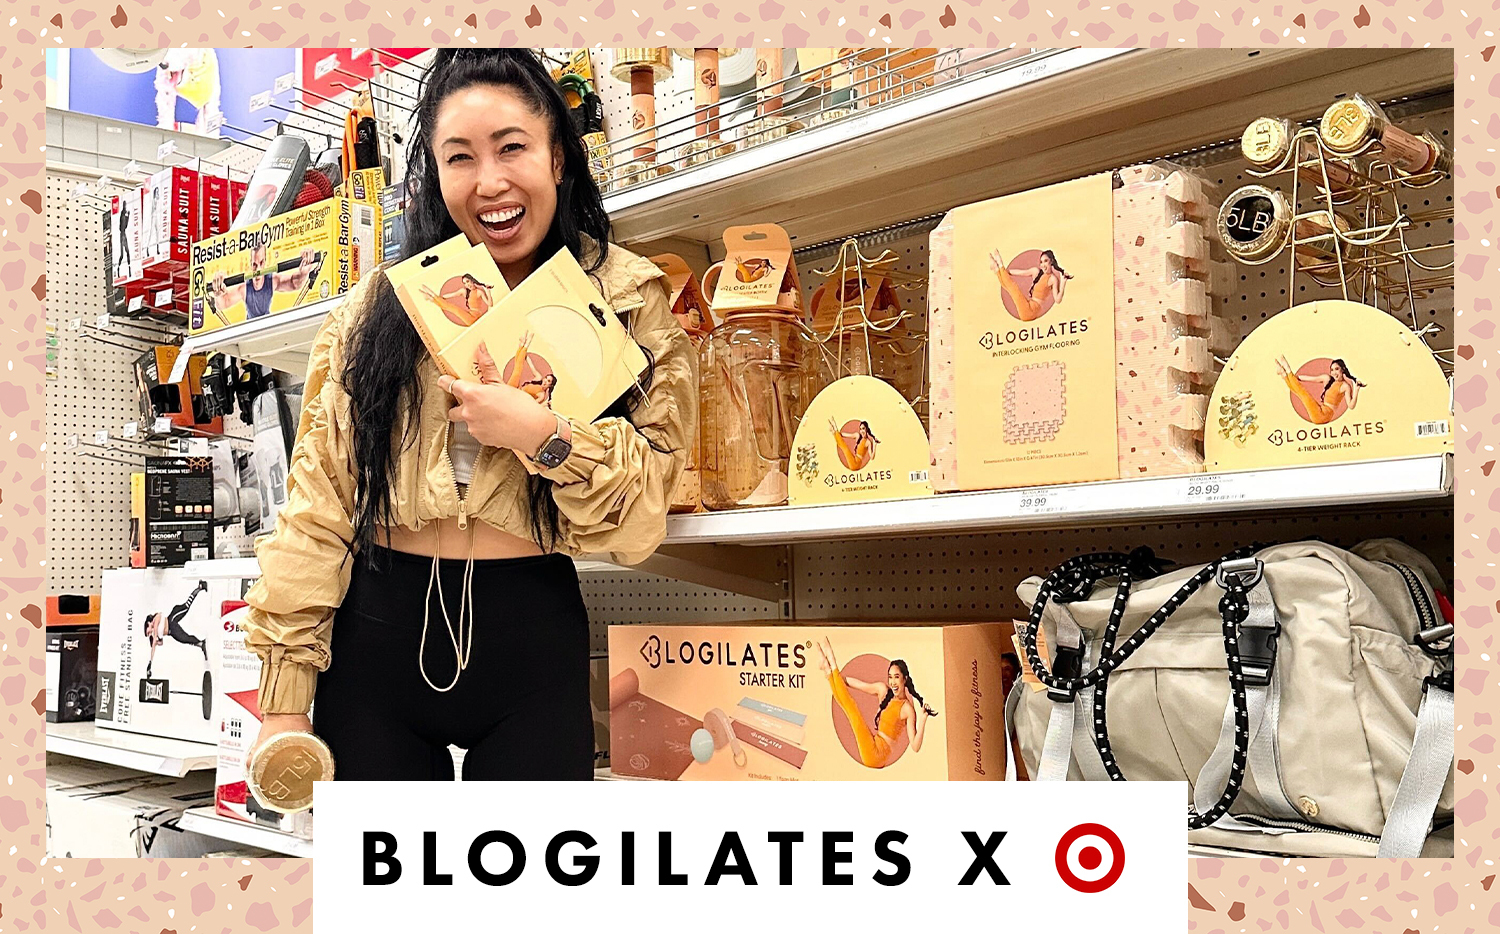 OMG!!!!!!! BLOGILATES IS IN TARGET!!!!!!!!! - Blogilates